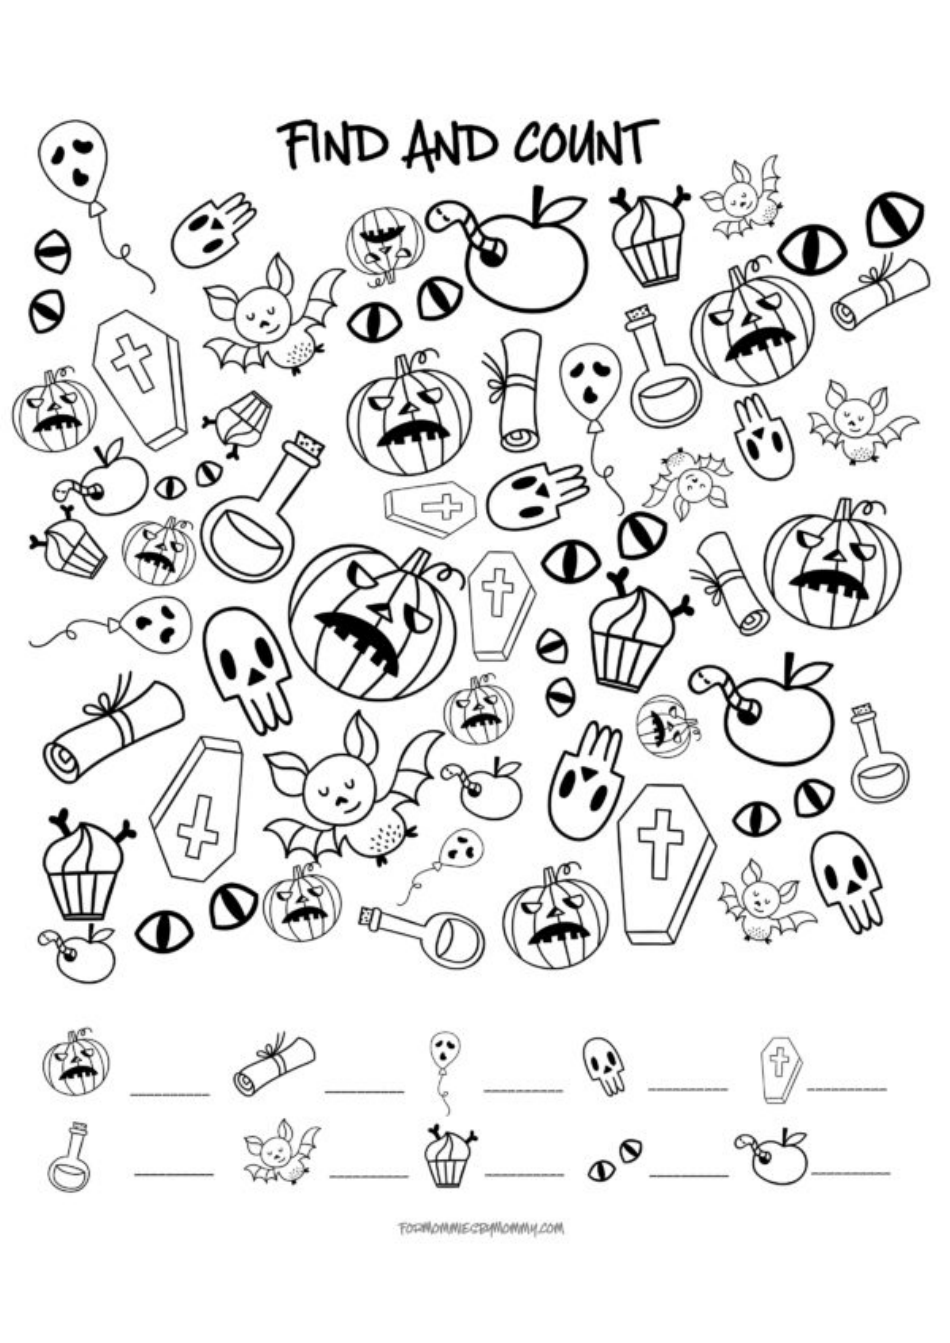 Halloween Coloring Sheet - Find and Count, Page 1